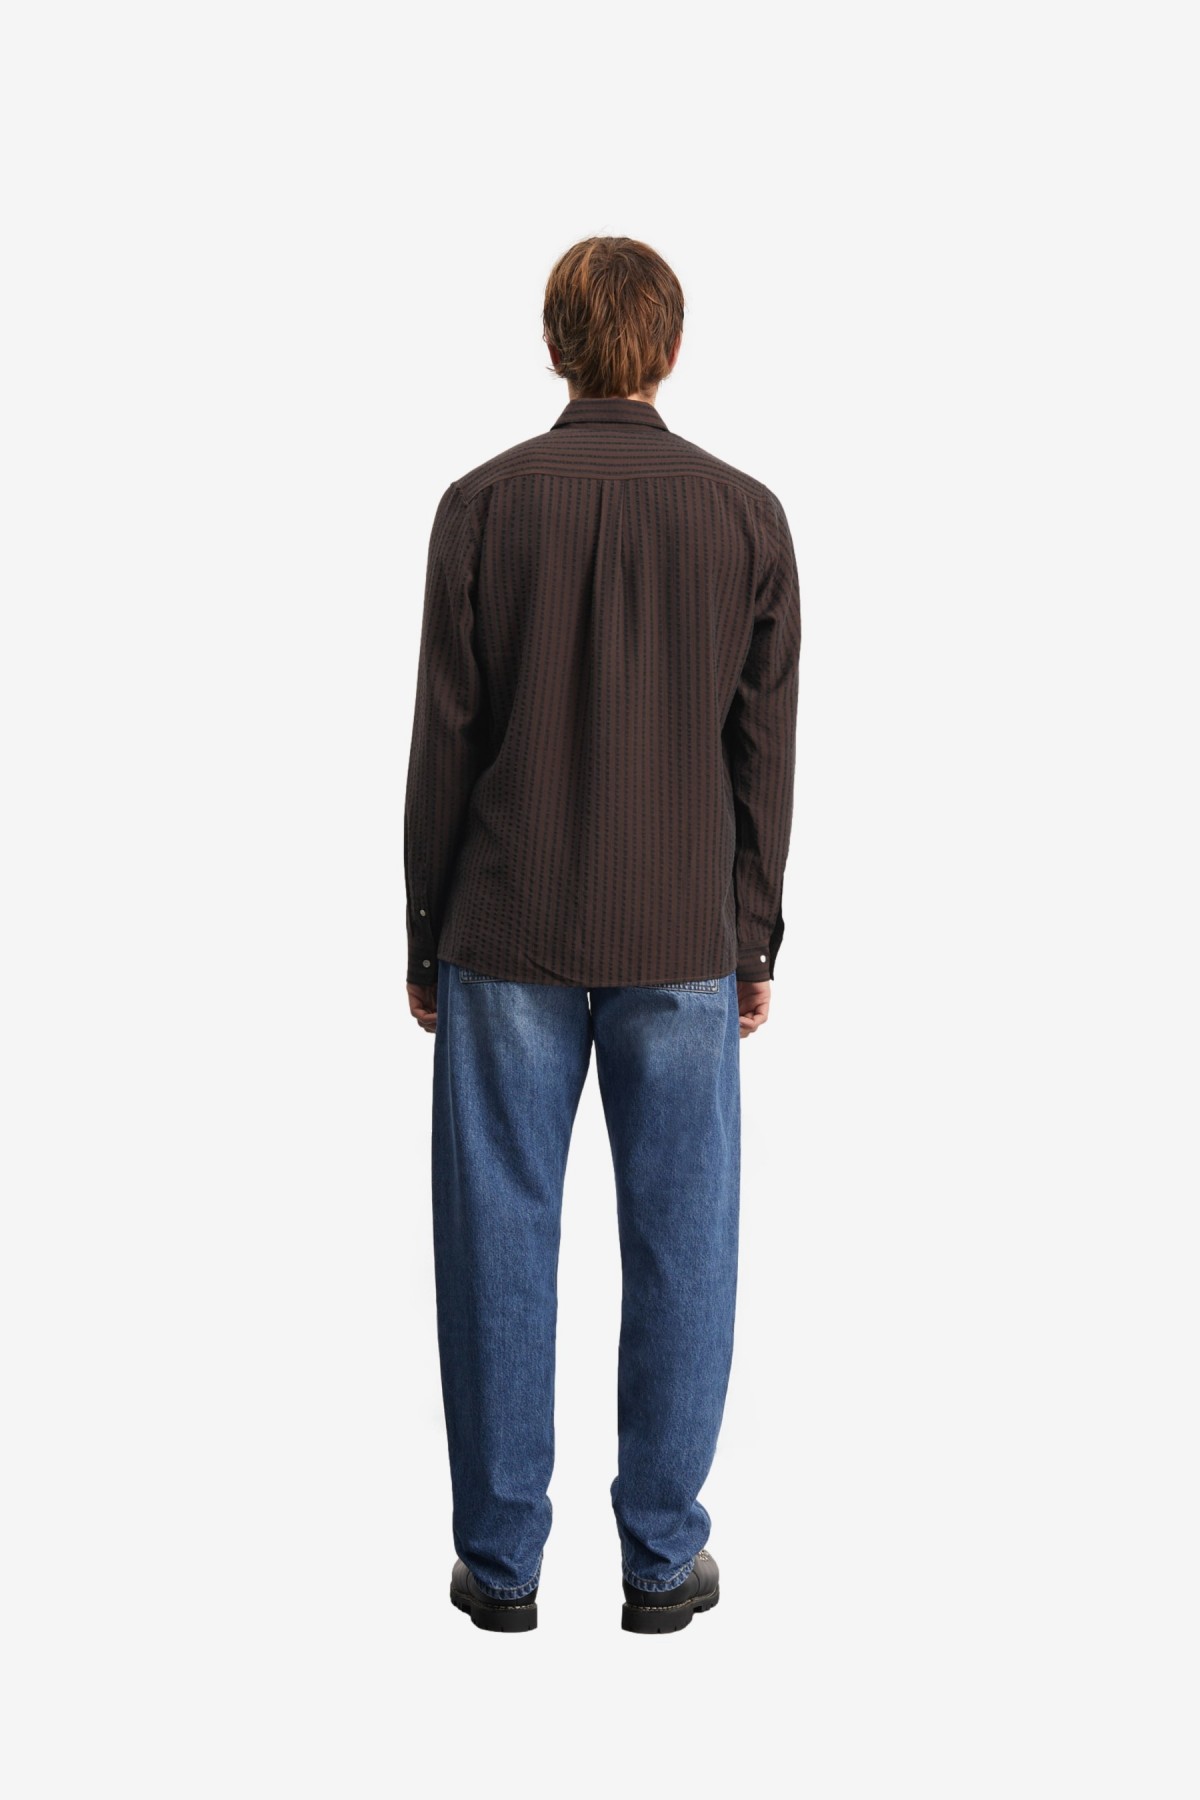 Another Aspect Shirt 1.0 in Dark Brown